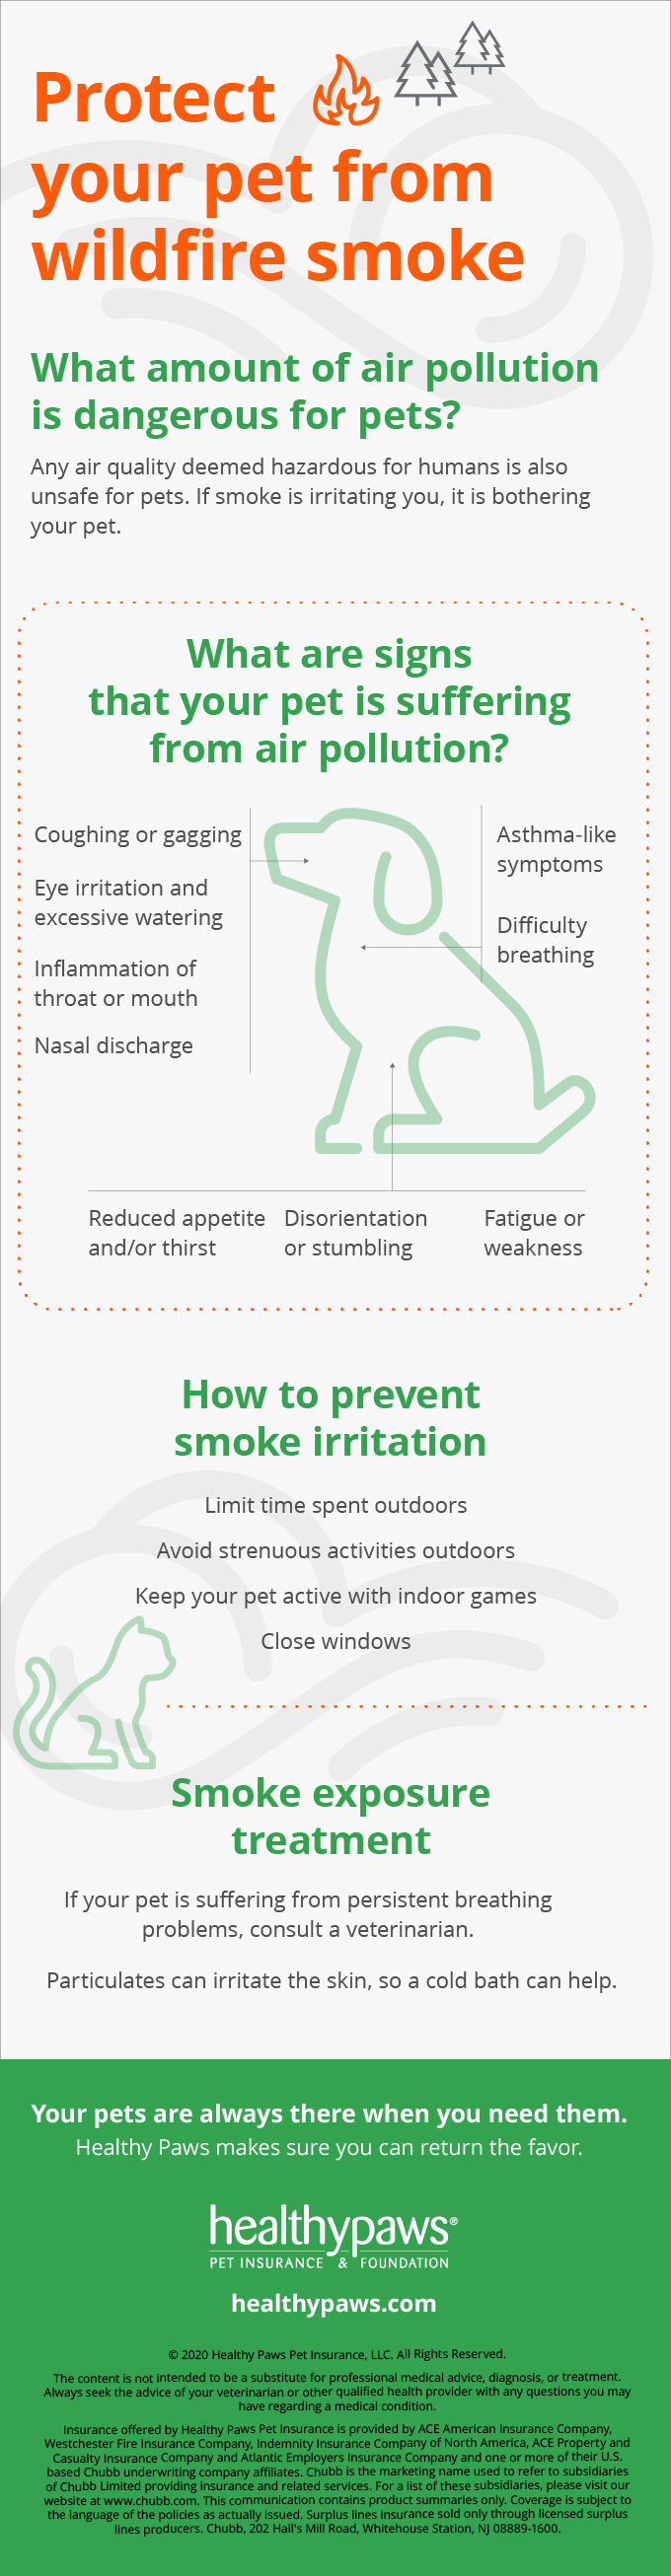 Infographic: Protect your pet from wildfire smoke